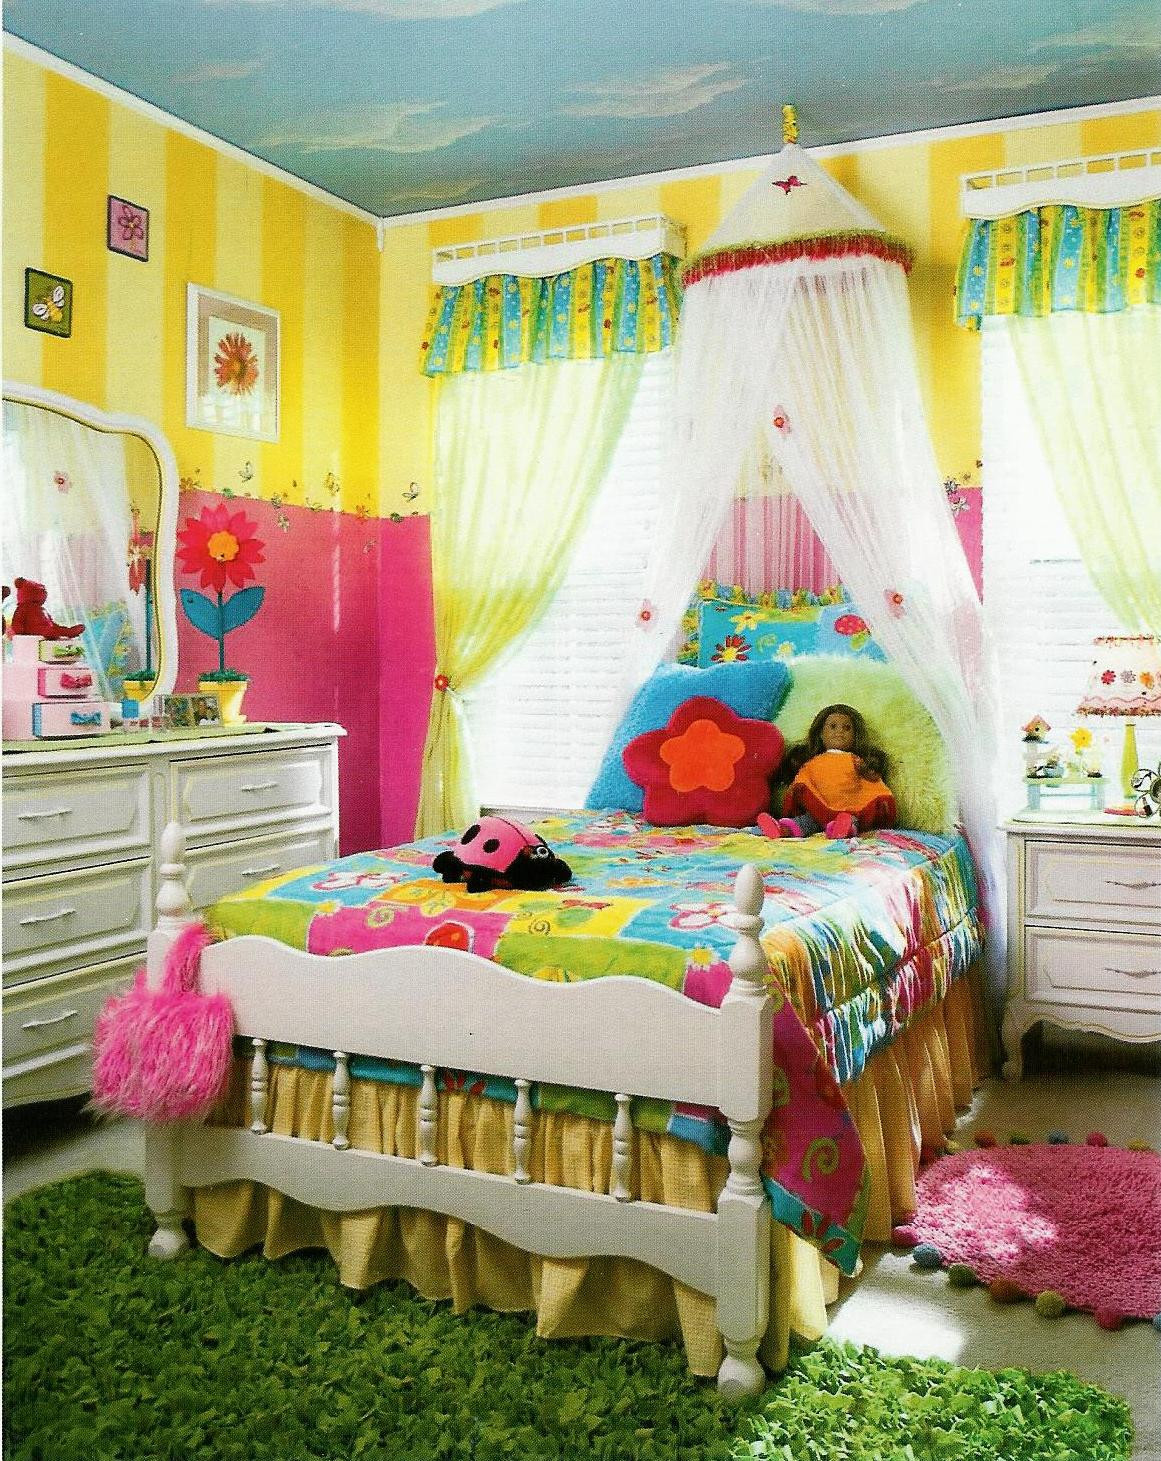 Kids Room Interior
 Tips for Decorating Kid’s Rooms